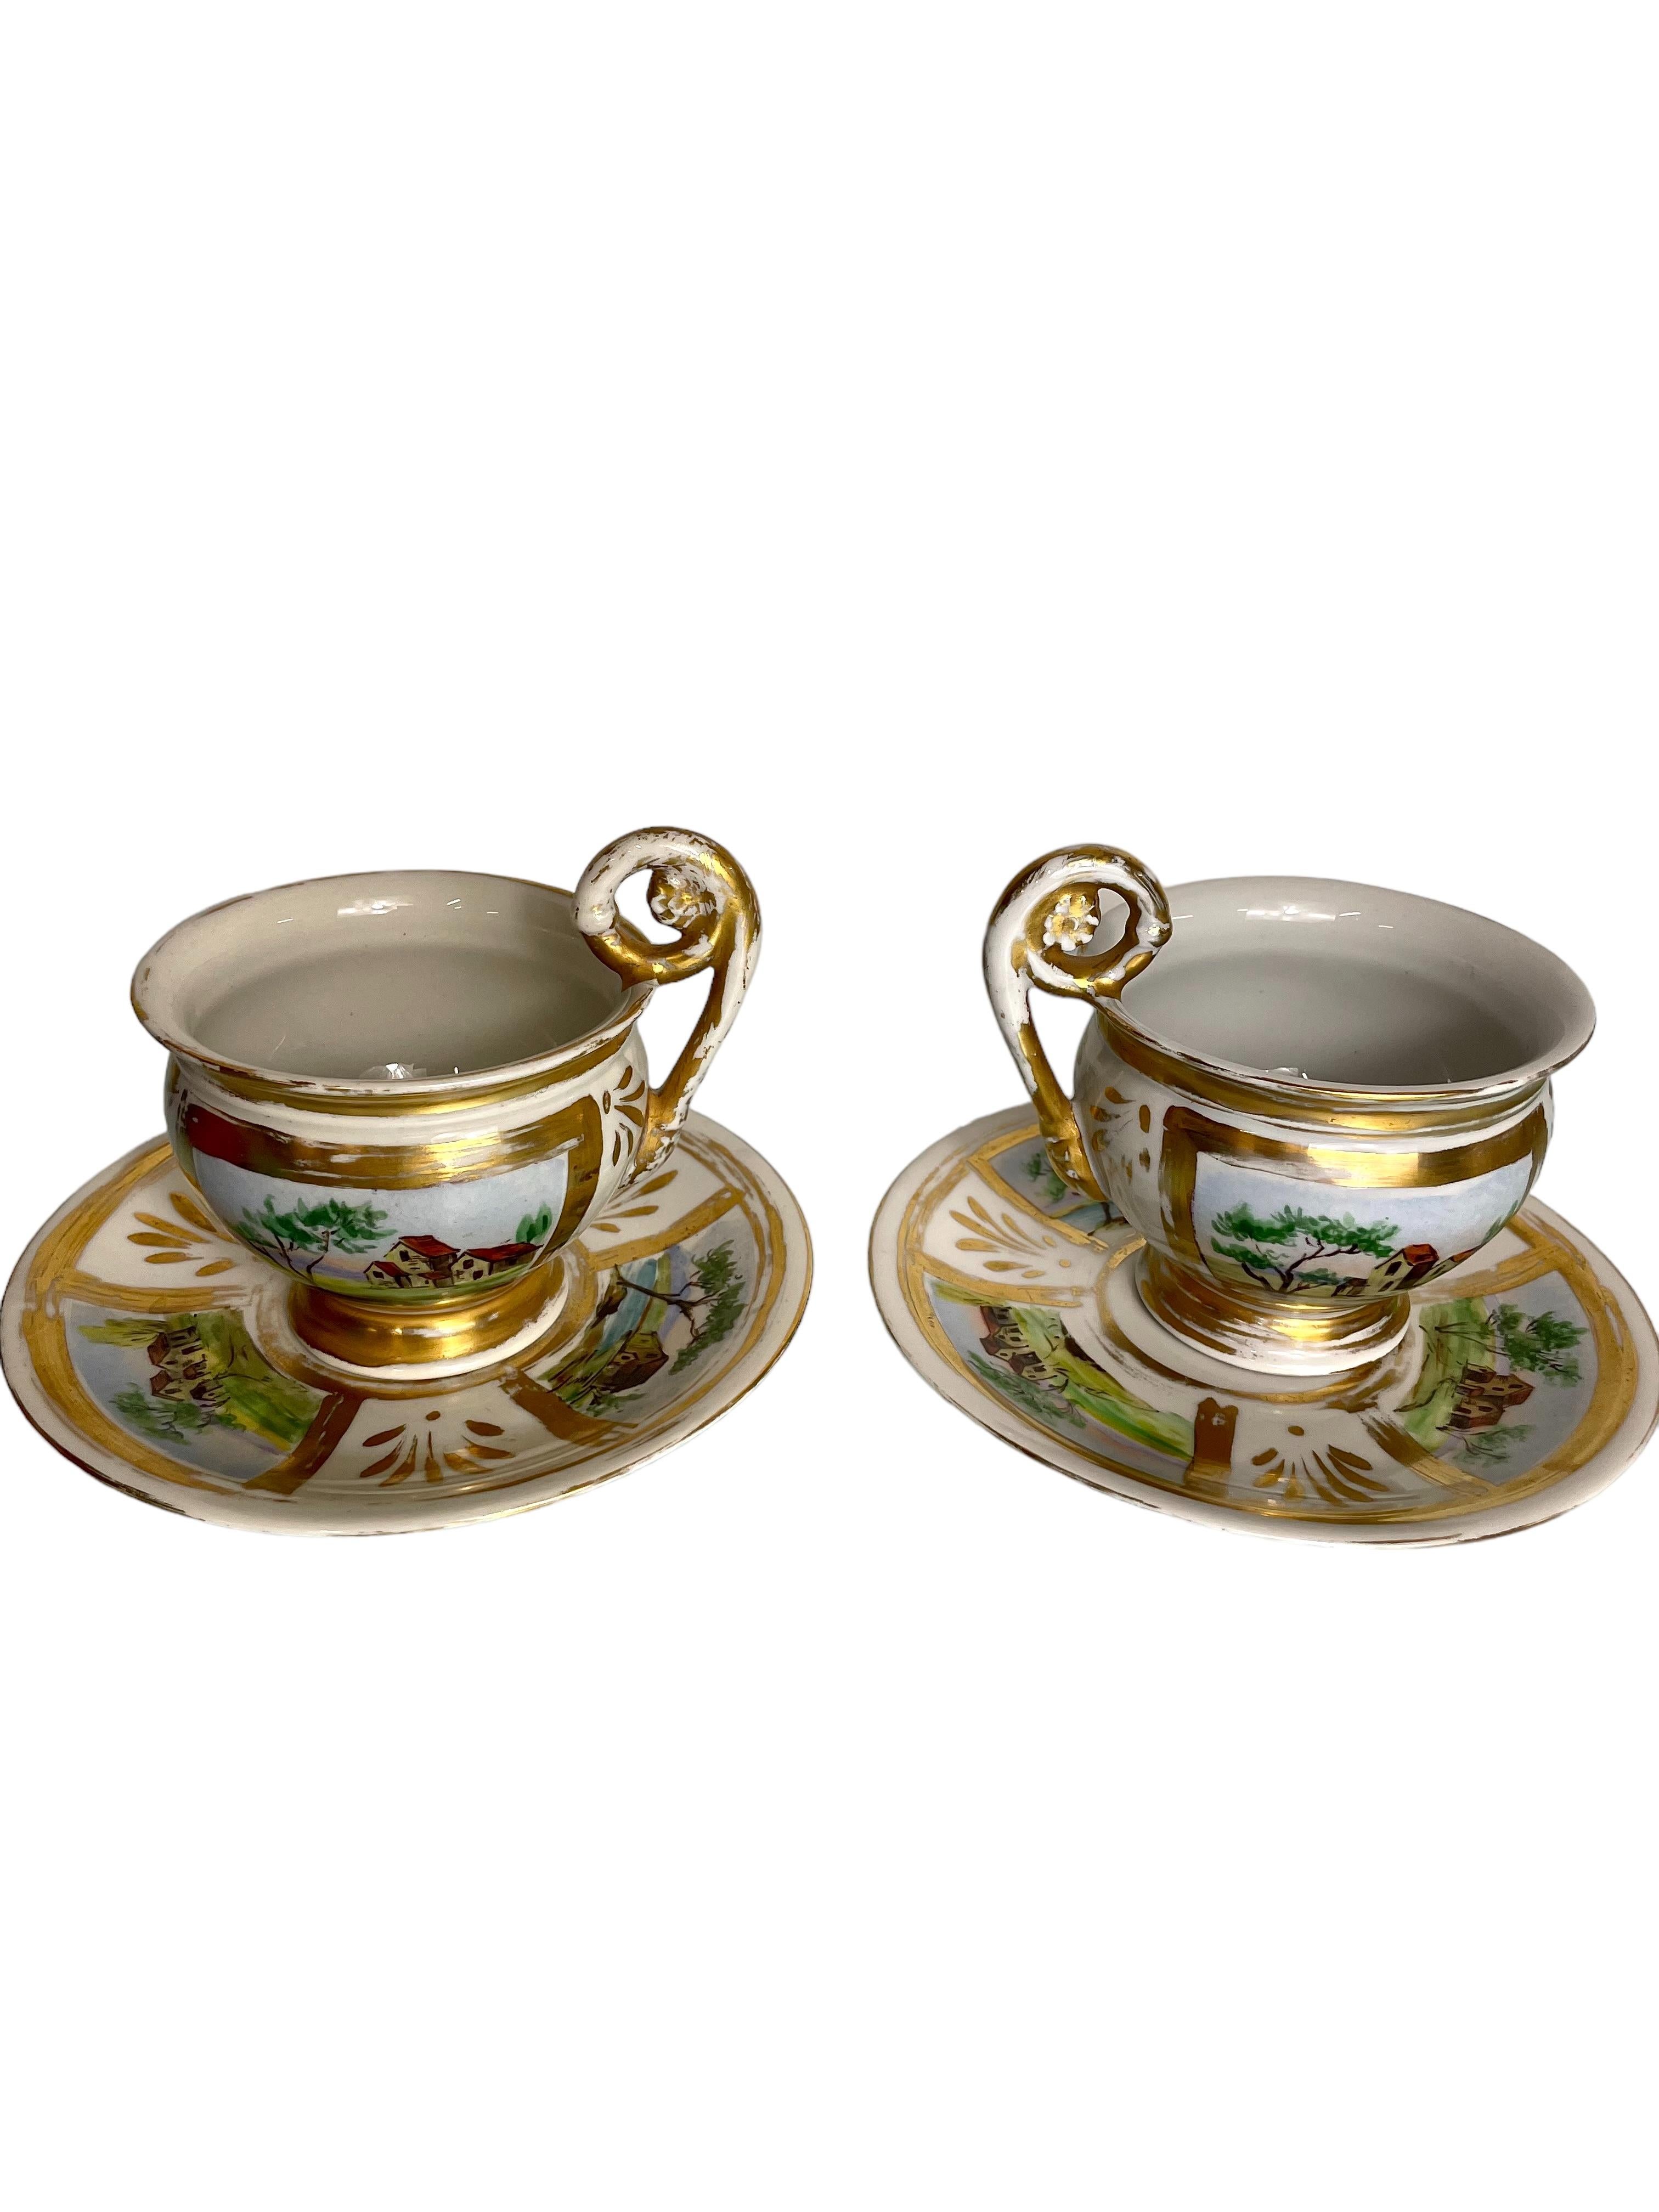 Pair of French Porcelain Cups and Saucers. Paris, 19th Century For Sale 1